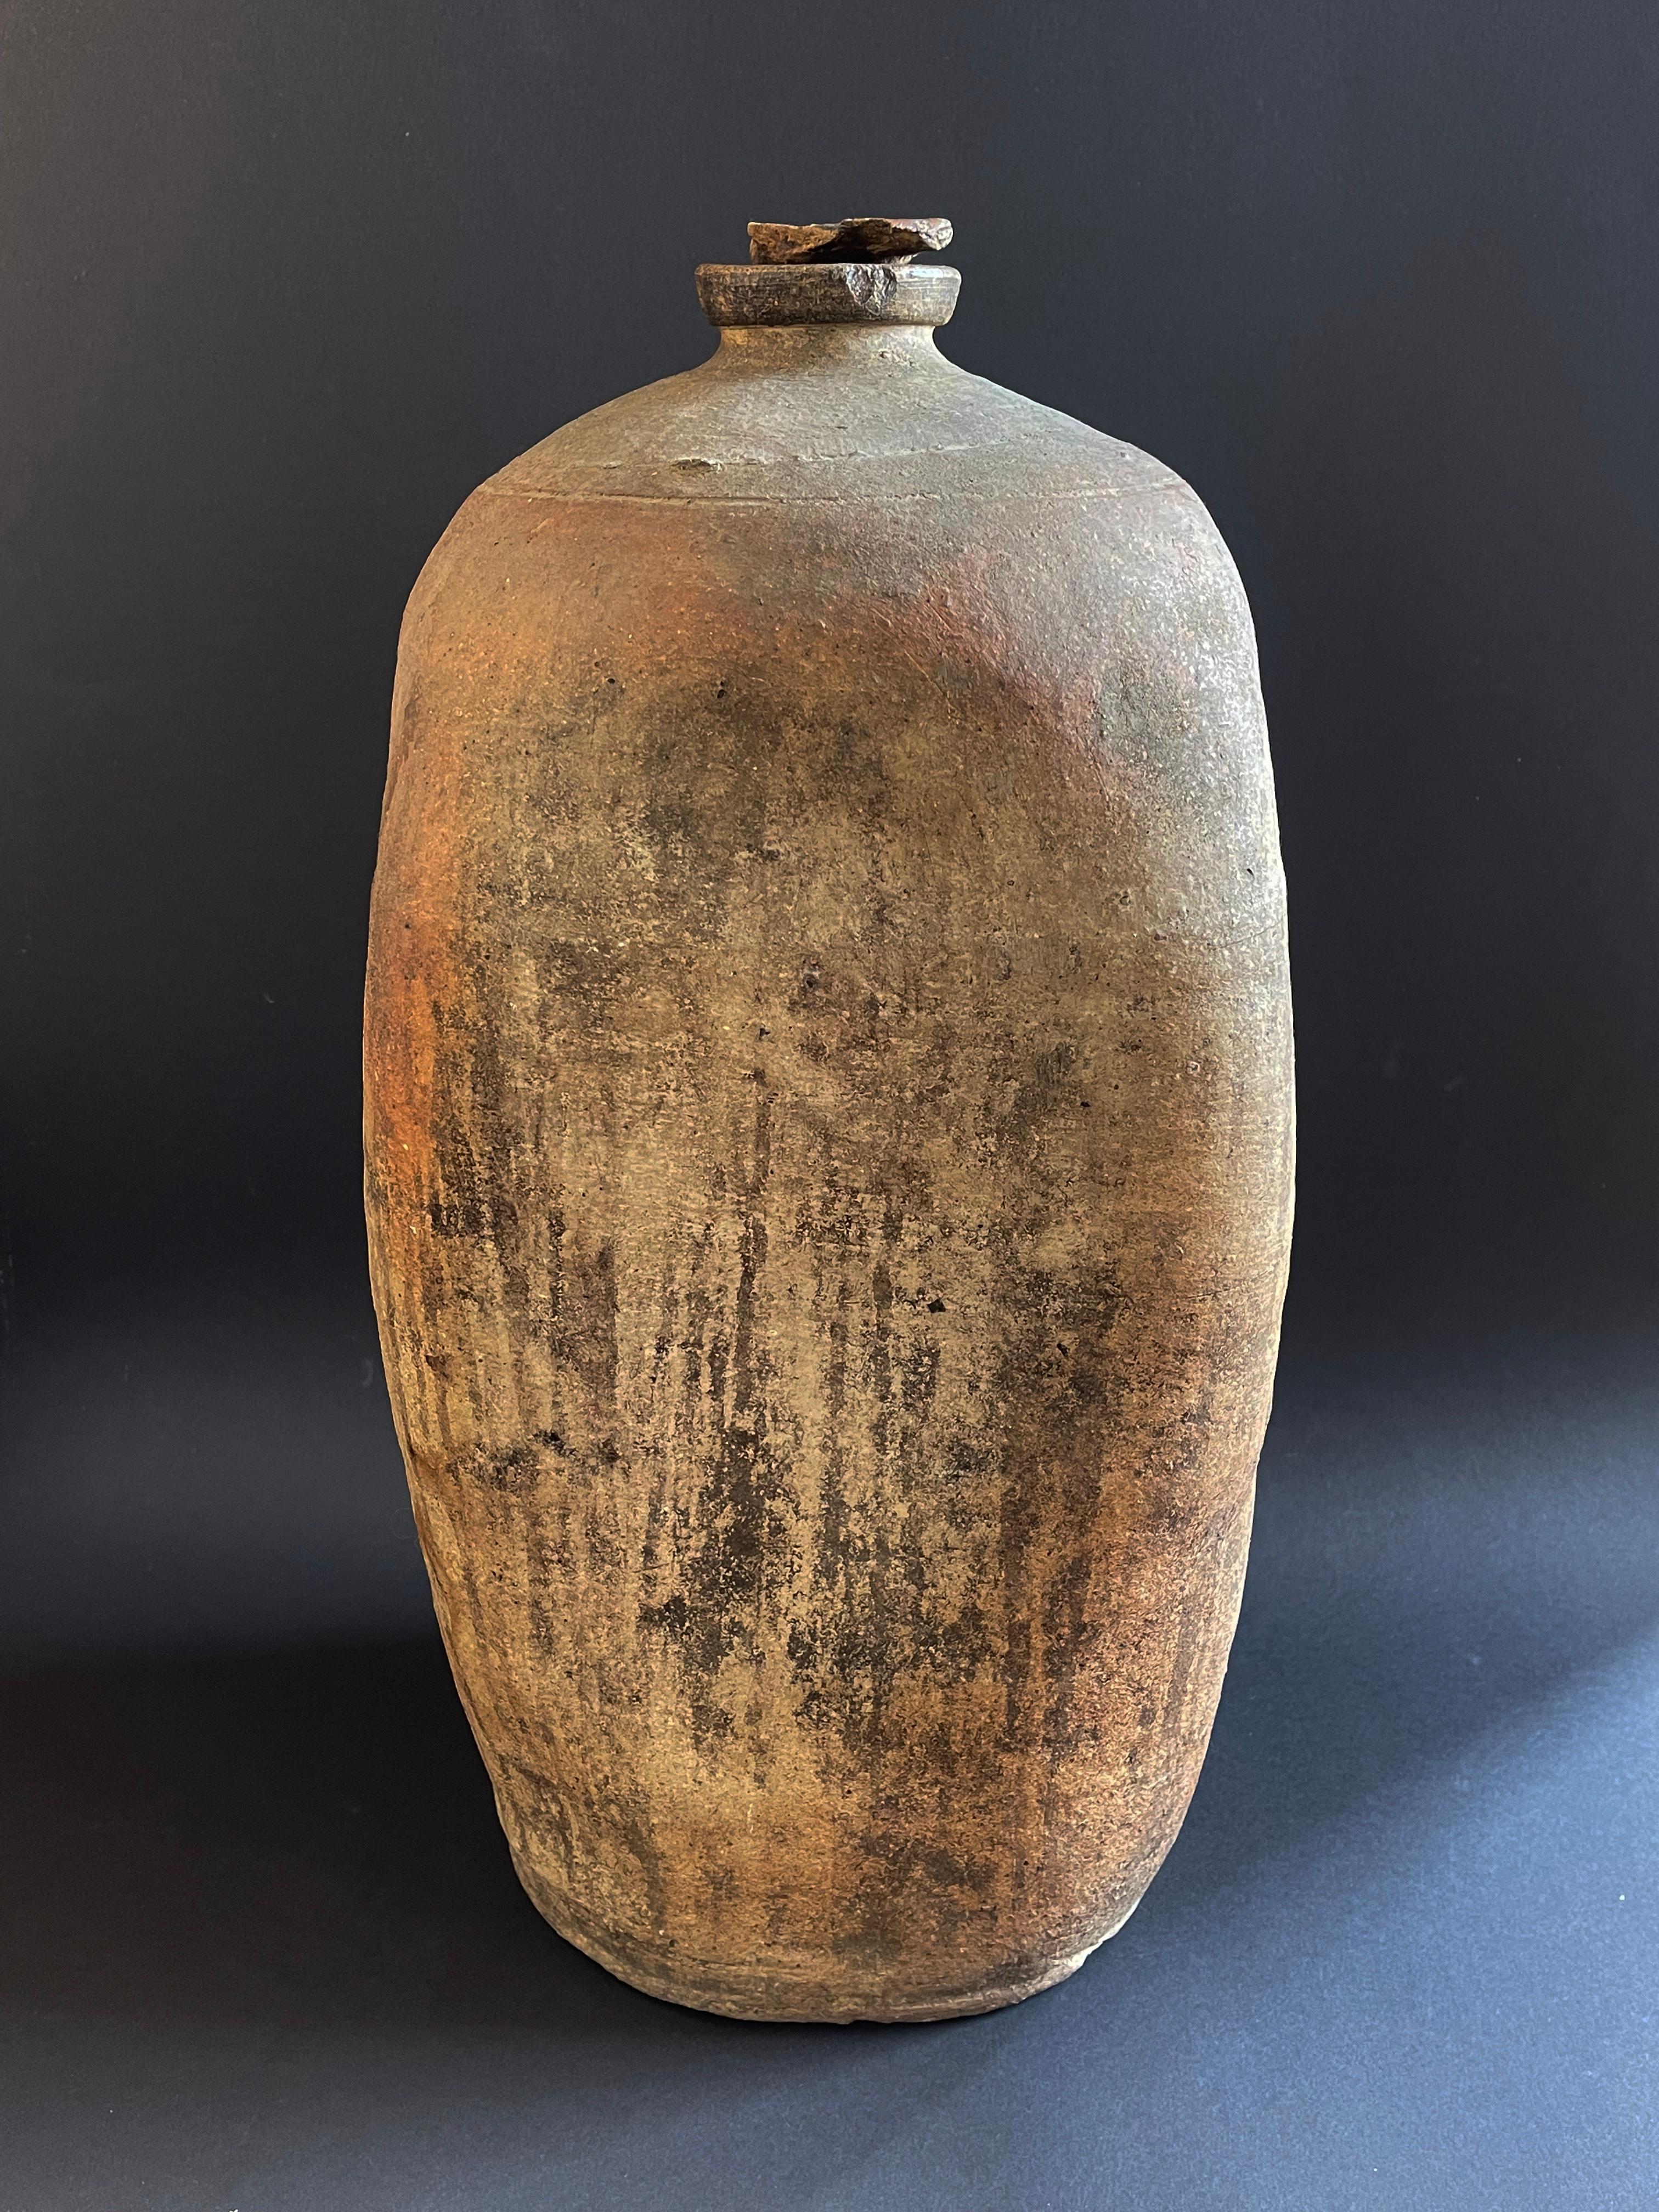 Antique hand crafted and unique stoneware jug with a square belly and round base. The jug comes with a round screw cap.
Possibly Balkan area or Italy, around 1800s to 1900.
Beautiful burnt clay vessel, which was used to store (and make) plum